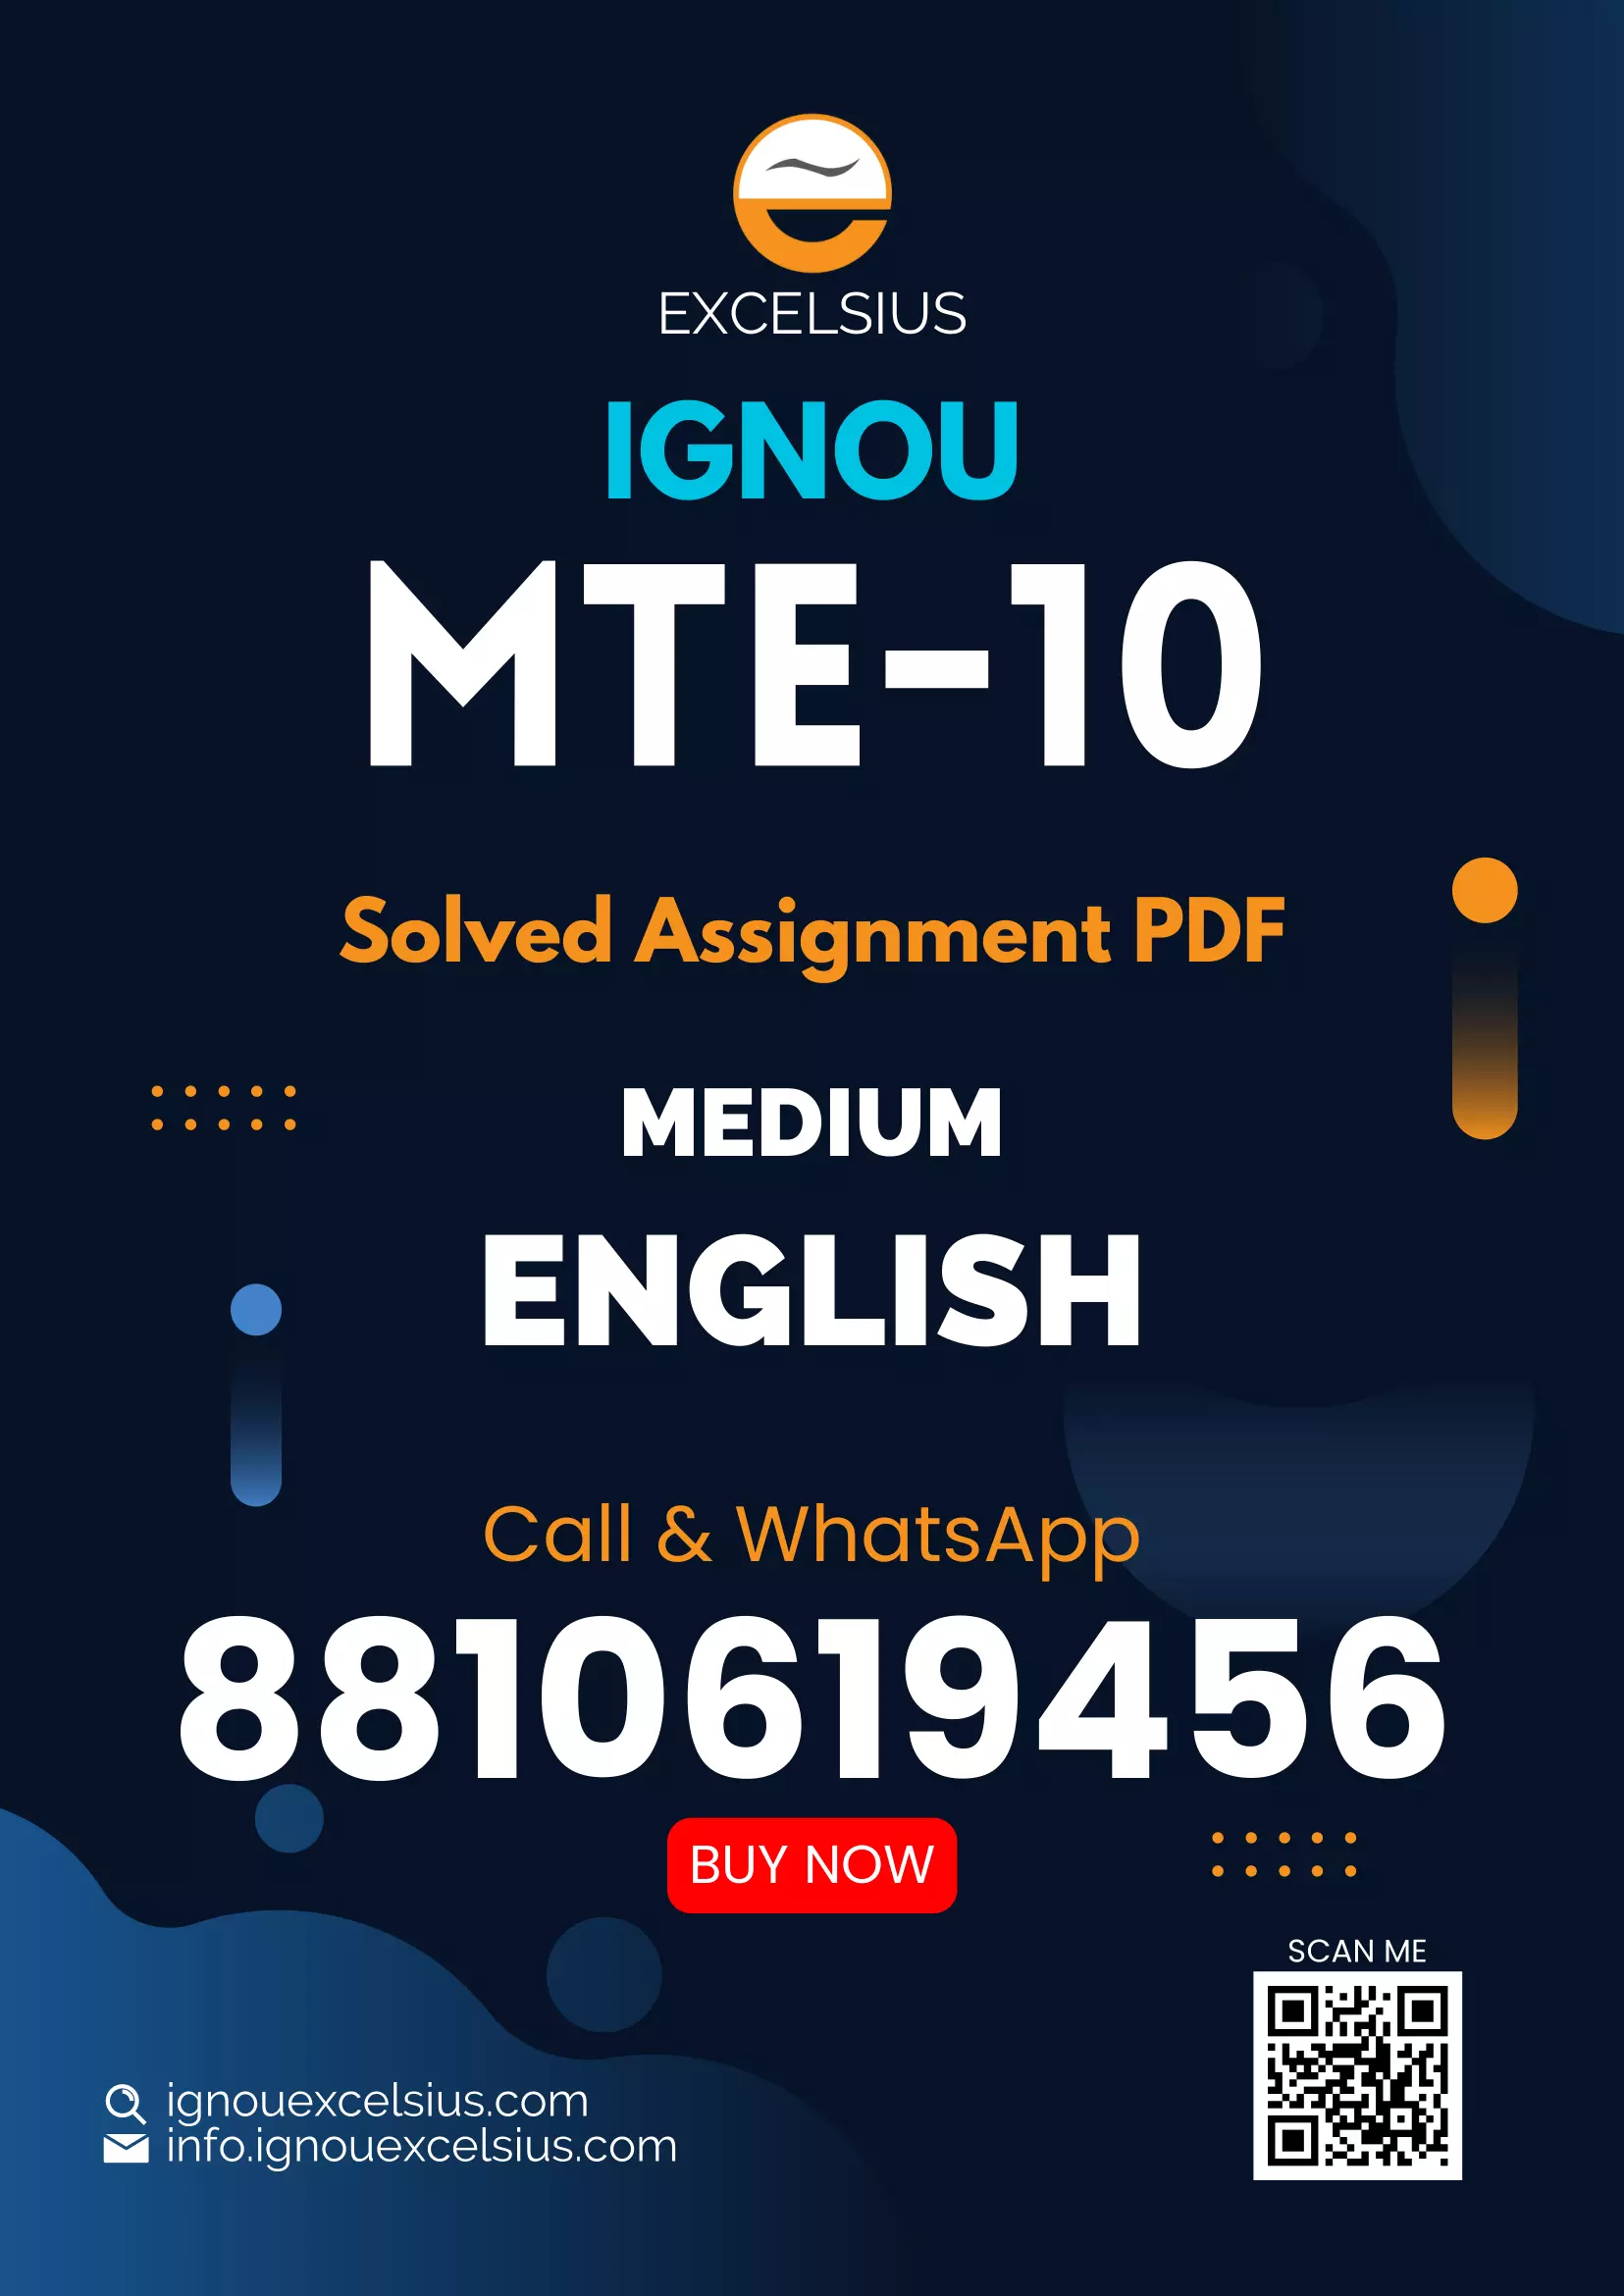 IGNOU MTE-10 - Numerical Analysis, Latest Solved Assignment-January 2023 - December 2023